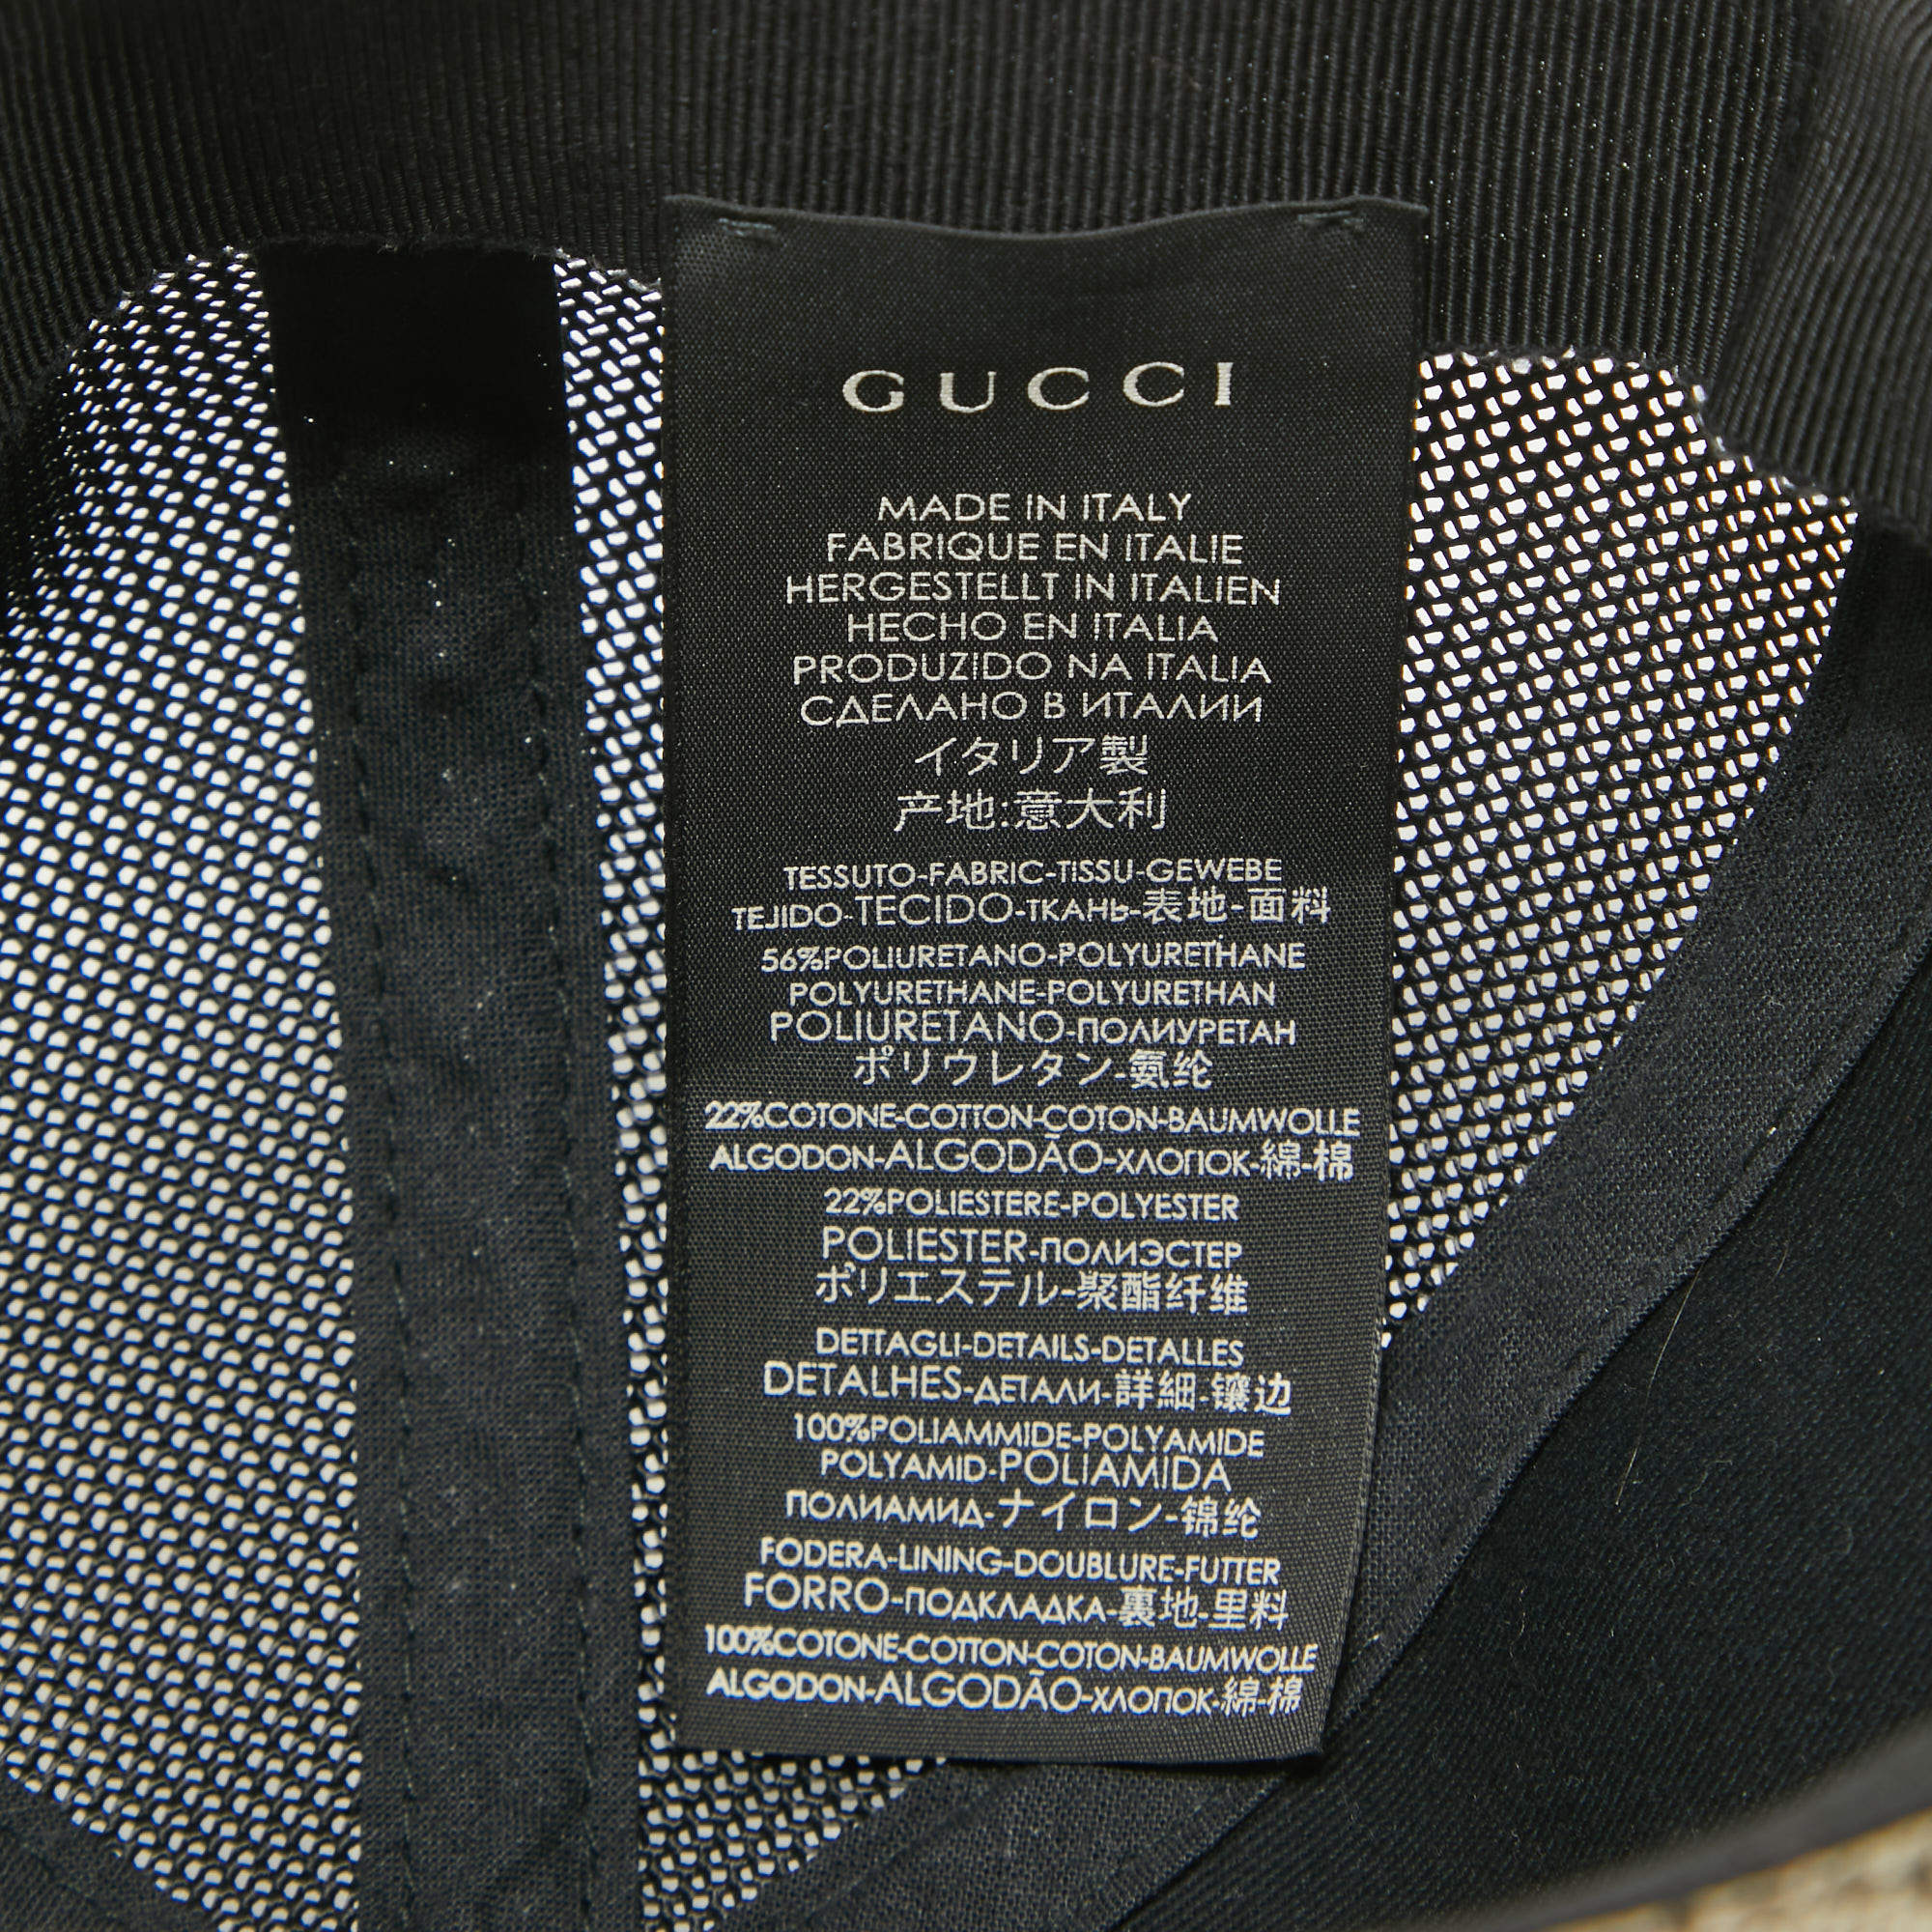 Baseball cap from the Gucci Tiger collection, GmarShops